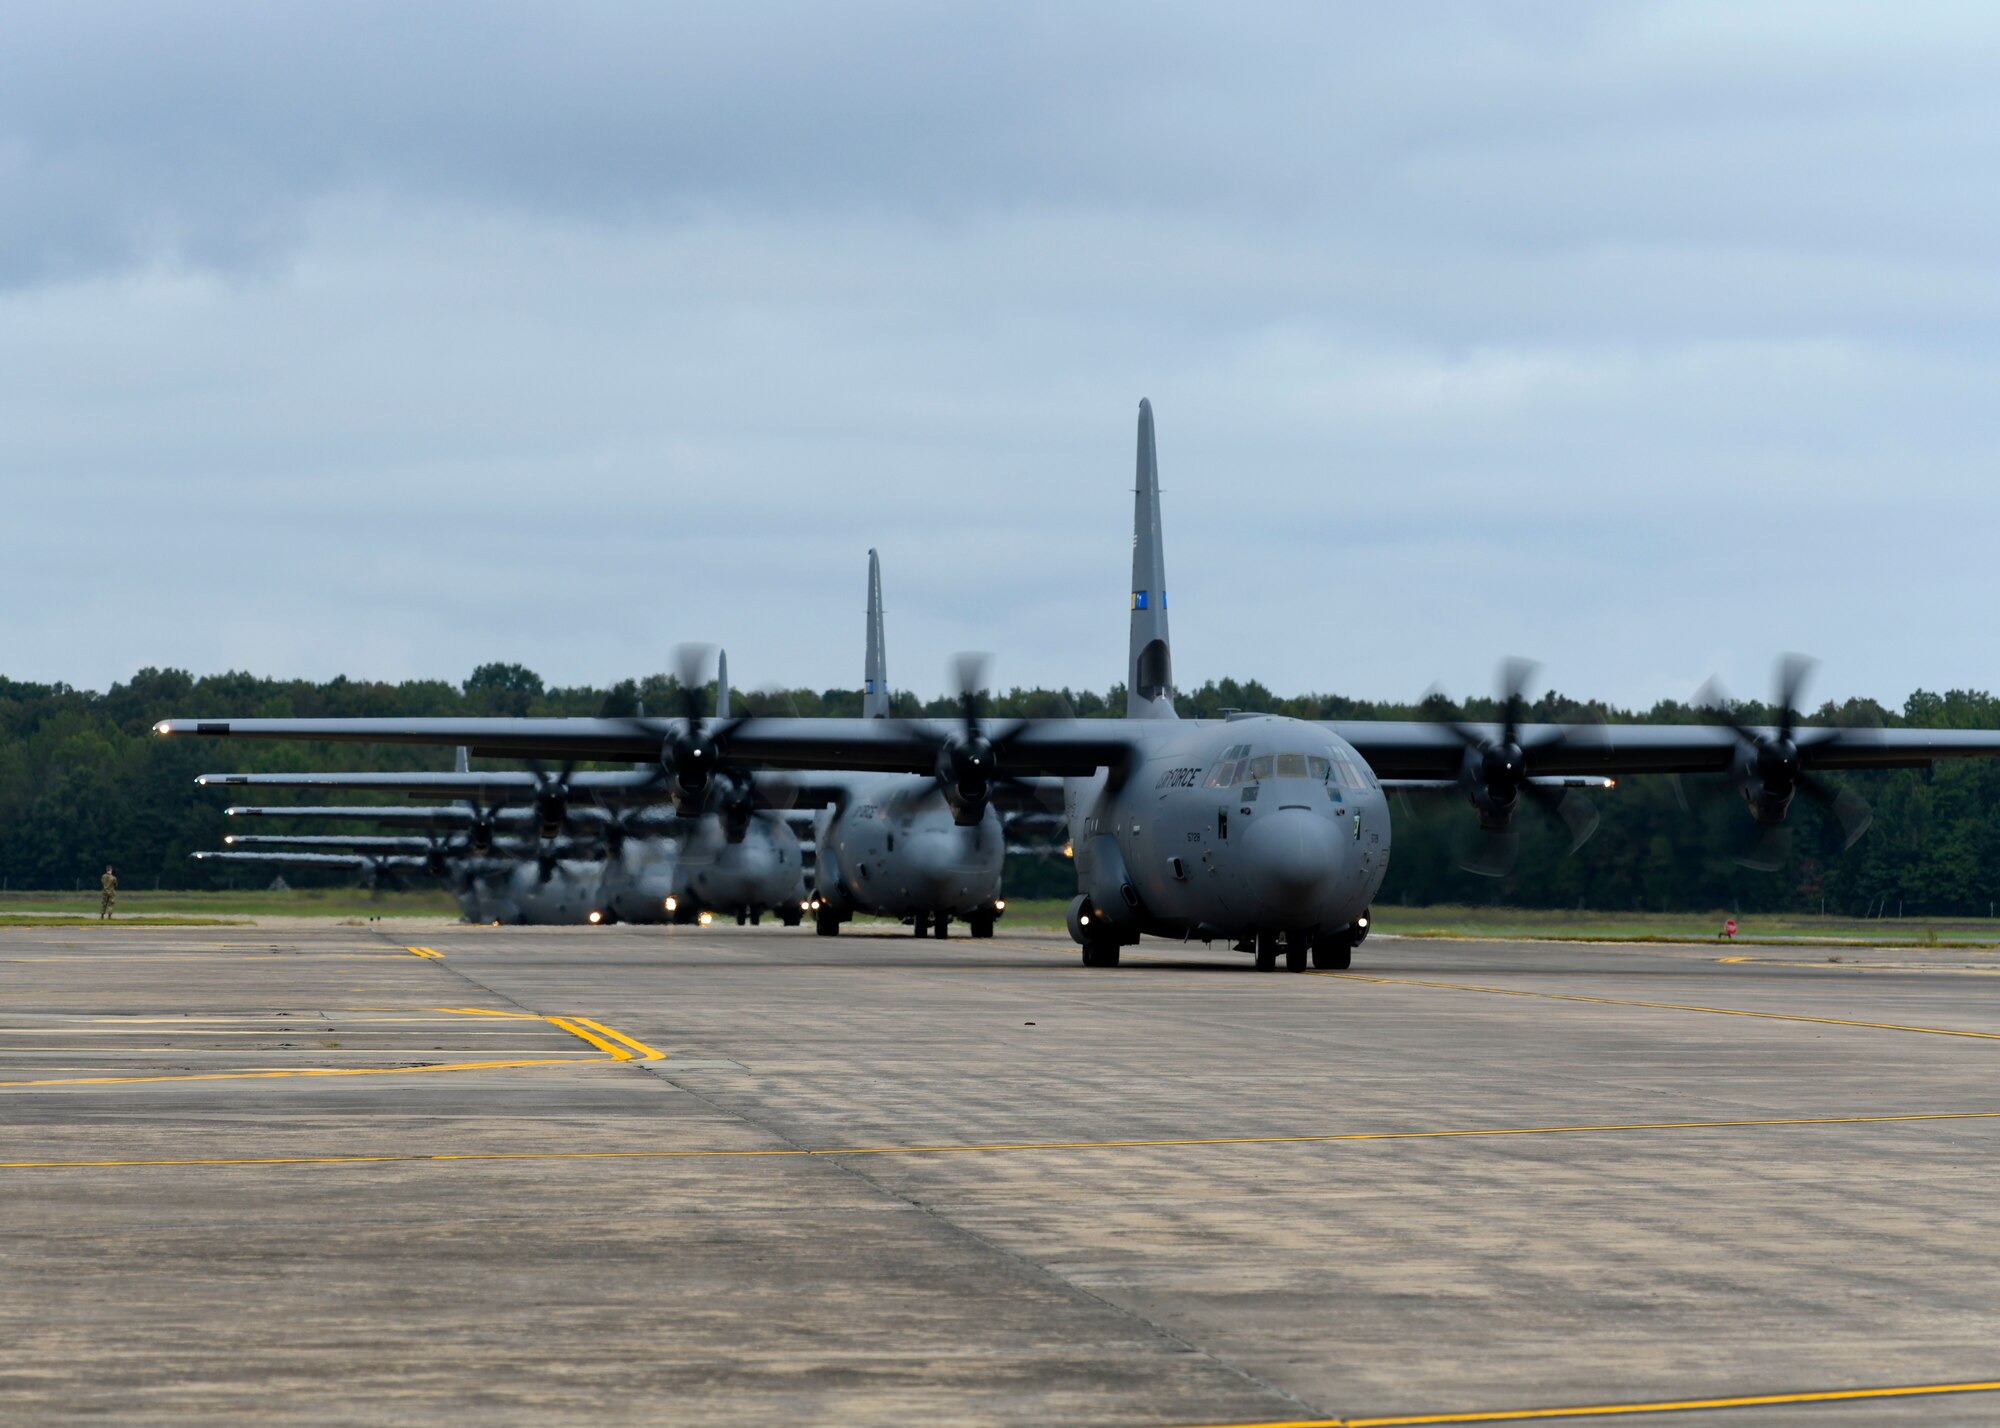 C-130s taxi down the flight line.